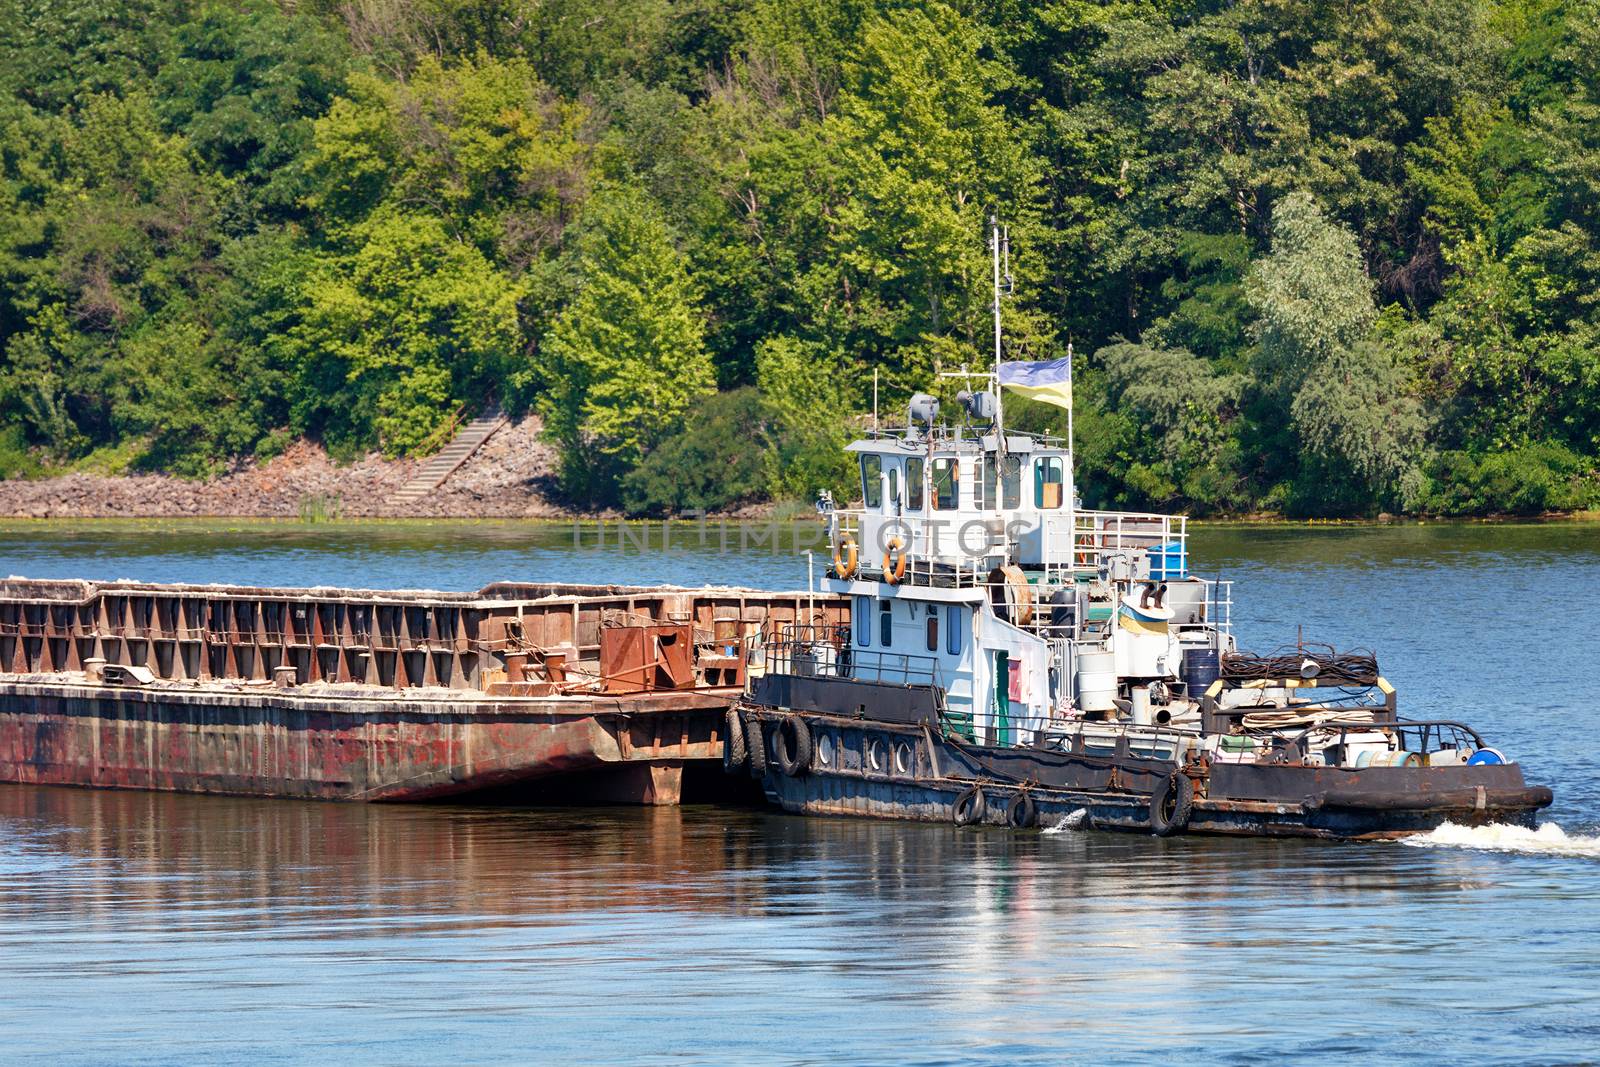 River tug slowly pushing an empty rusty barge down the river against coastal greenery, river freight transport concept, copy space.